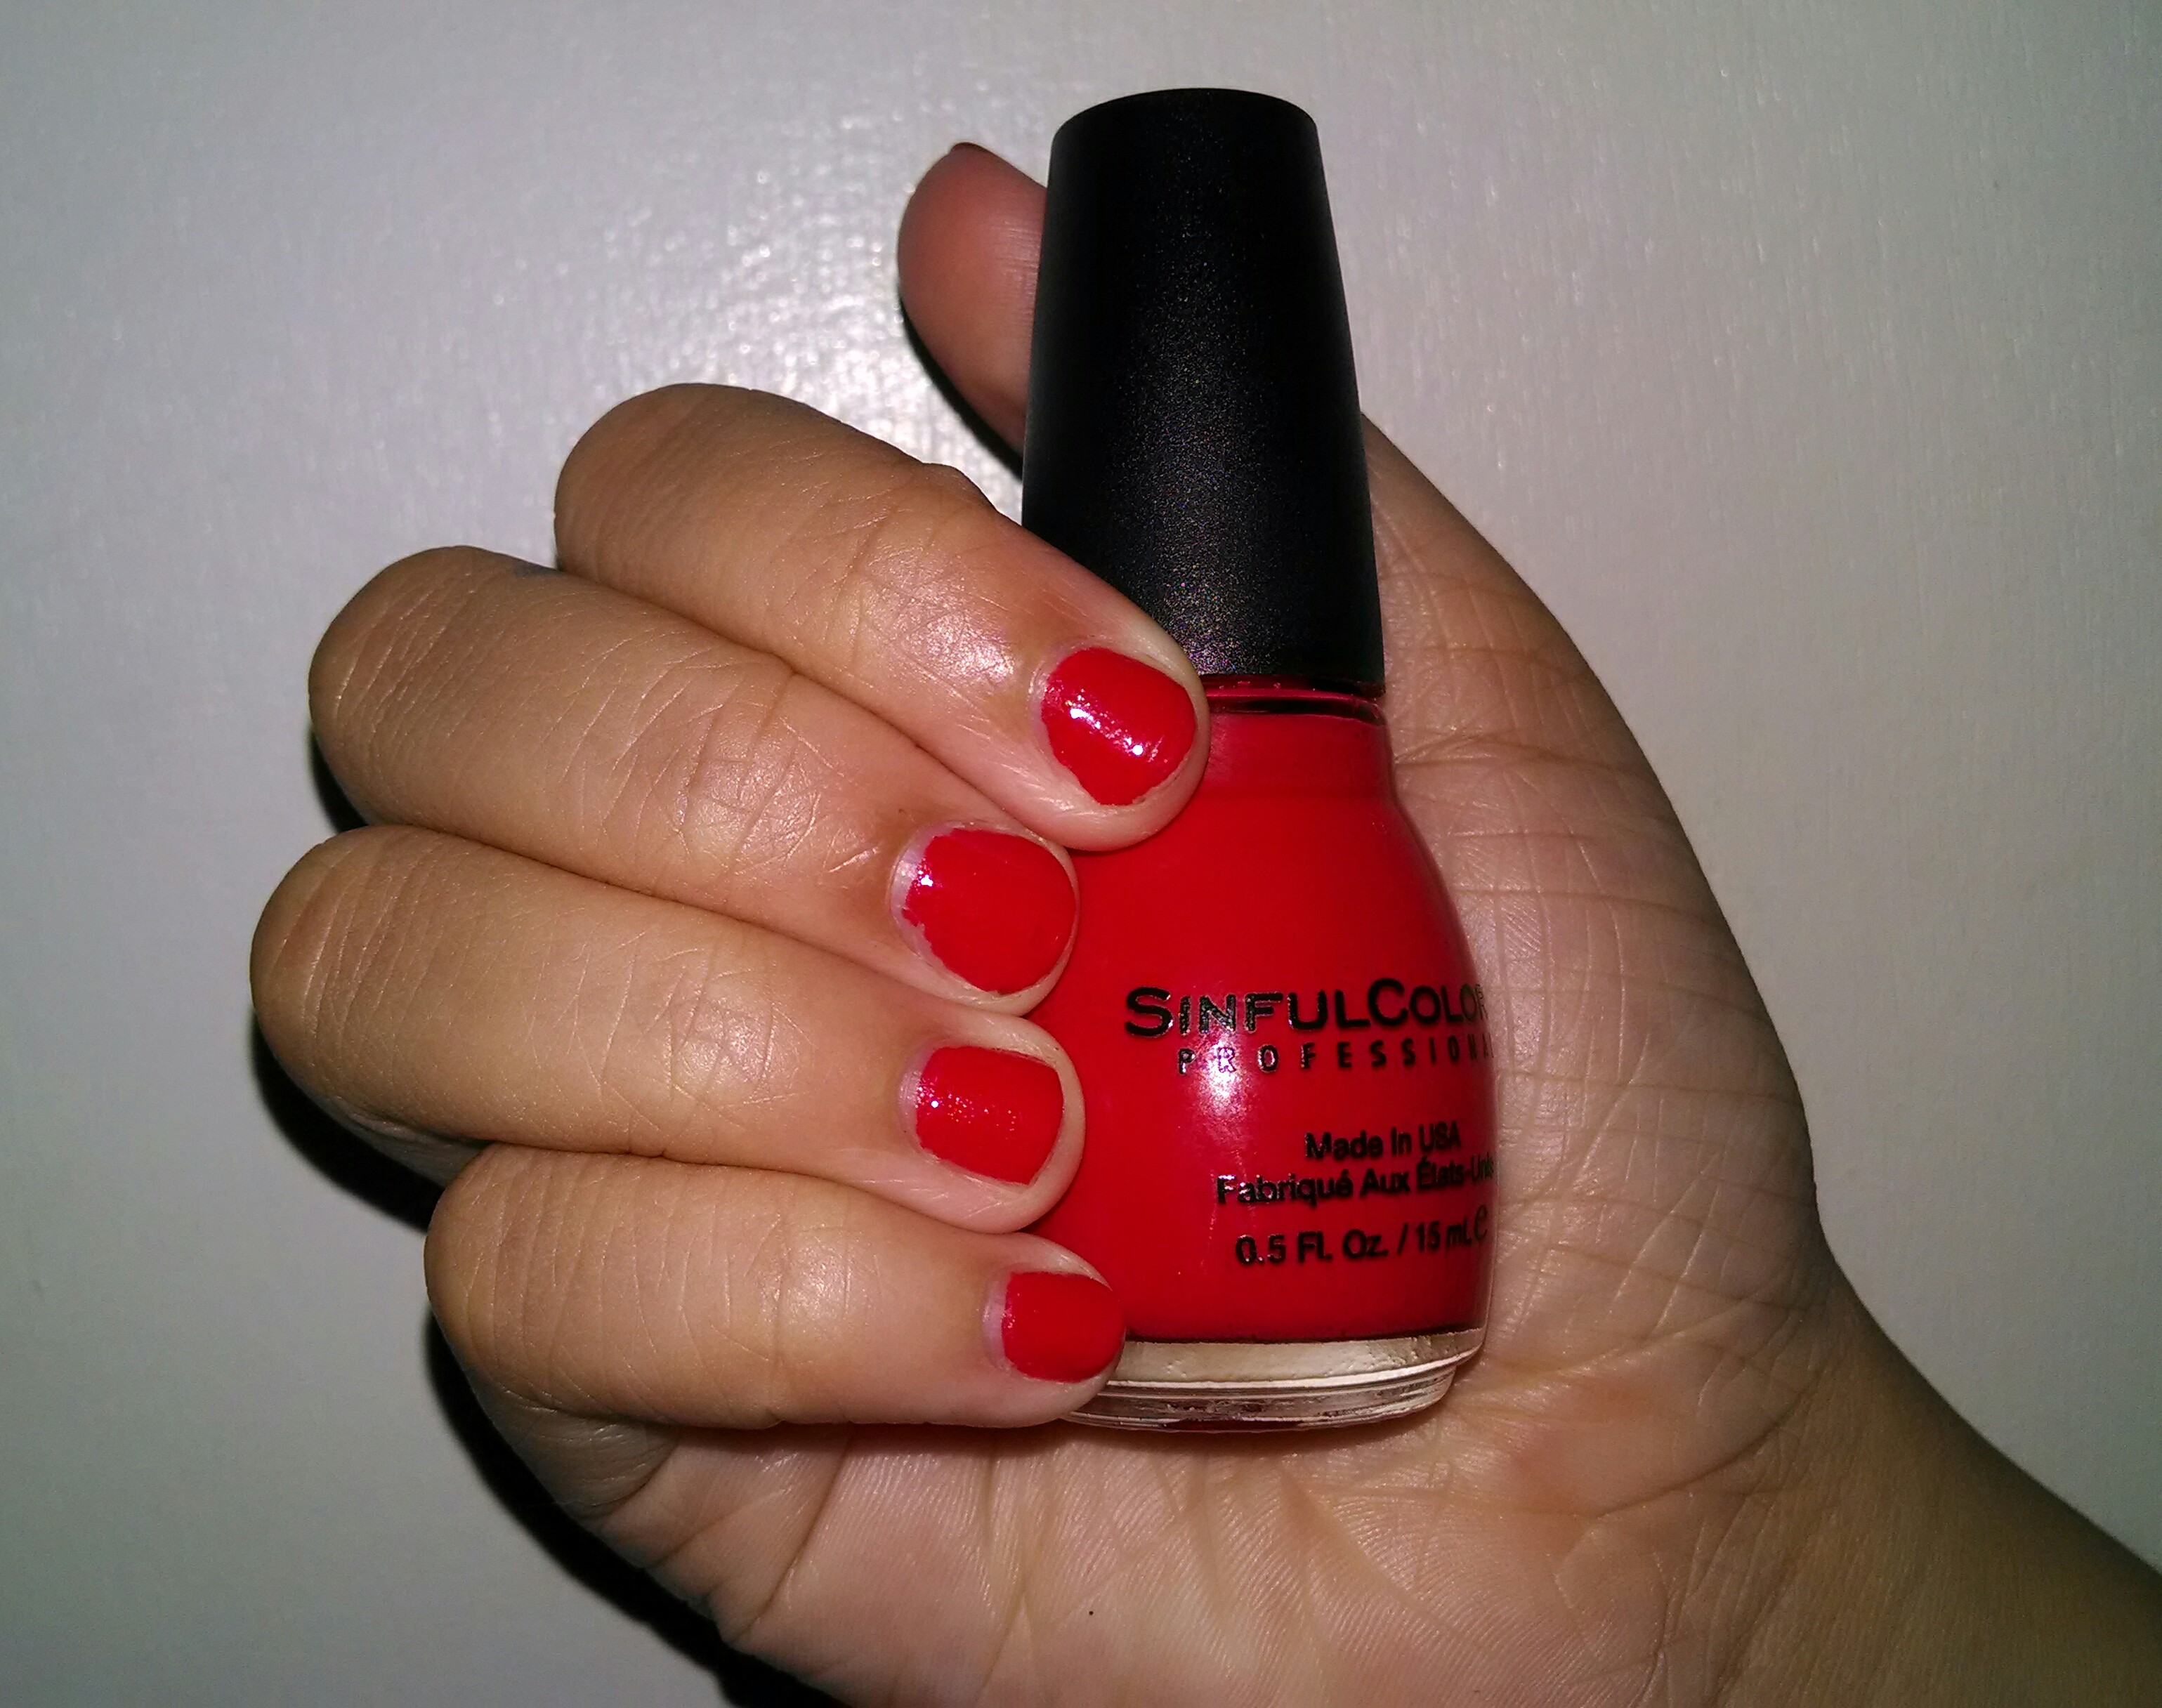 7. Sinful Colors Professional Nail Polish in "24/7" - wide 3